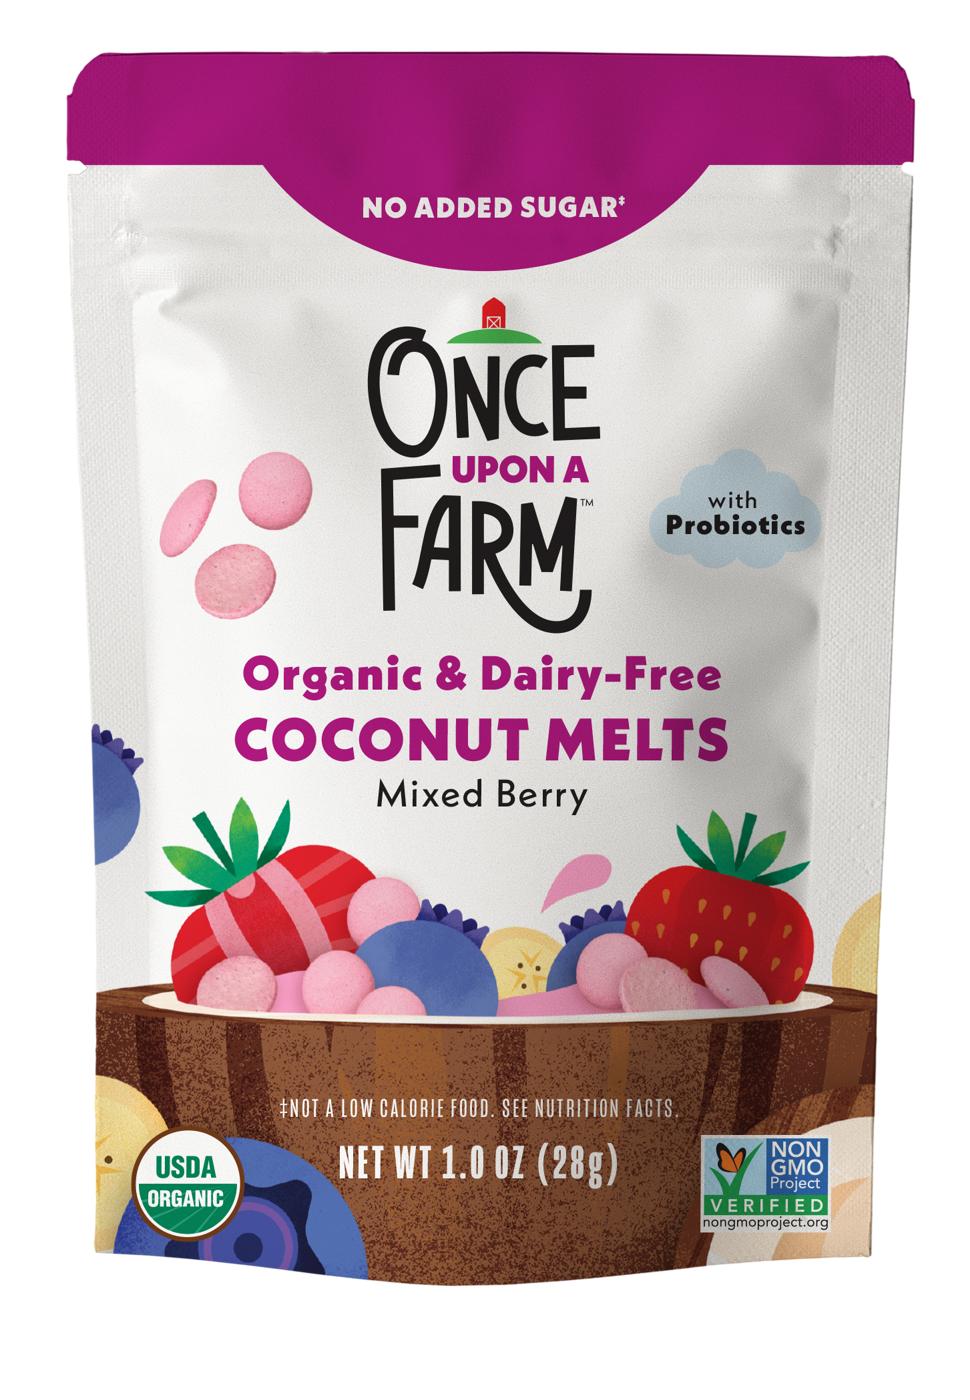 Once Upon a Farm Organic & Dairy-Free Coconut Melts - Mixed Berry; image 1 of 2